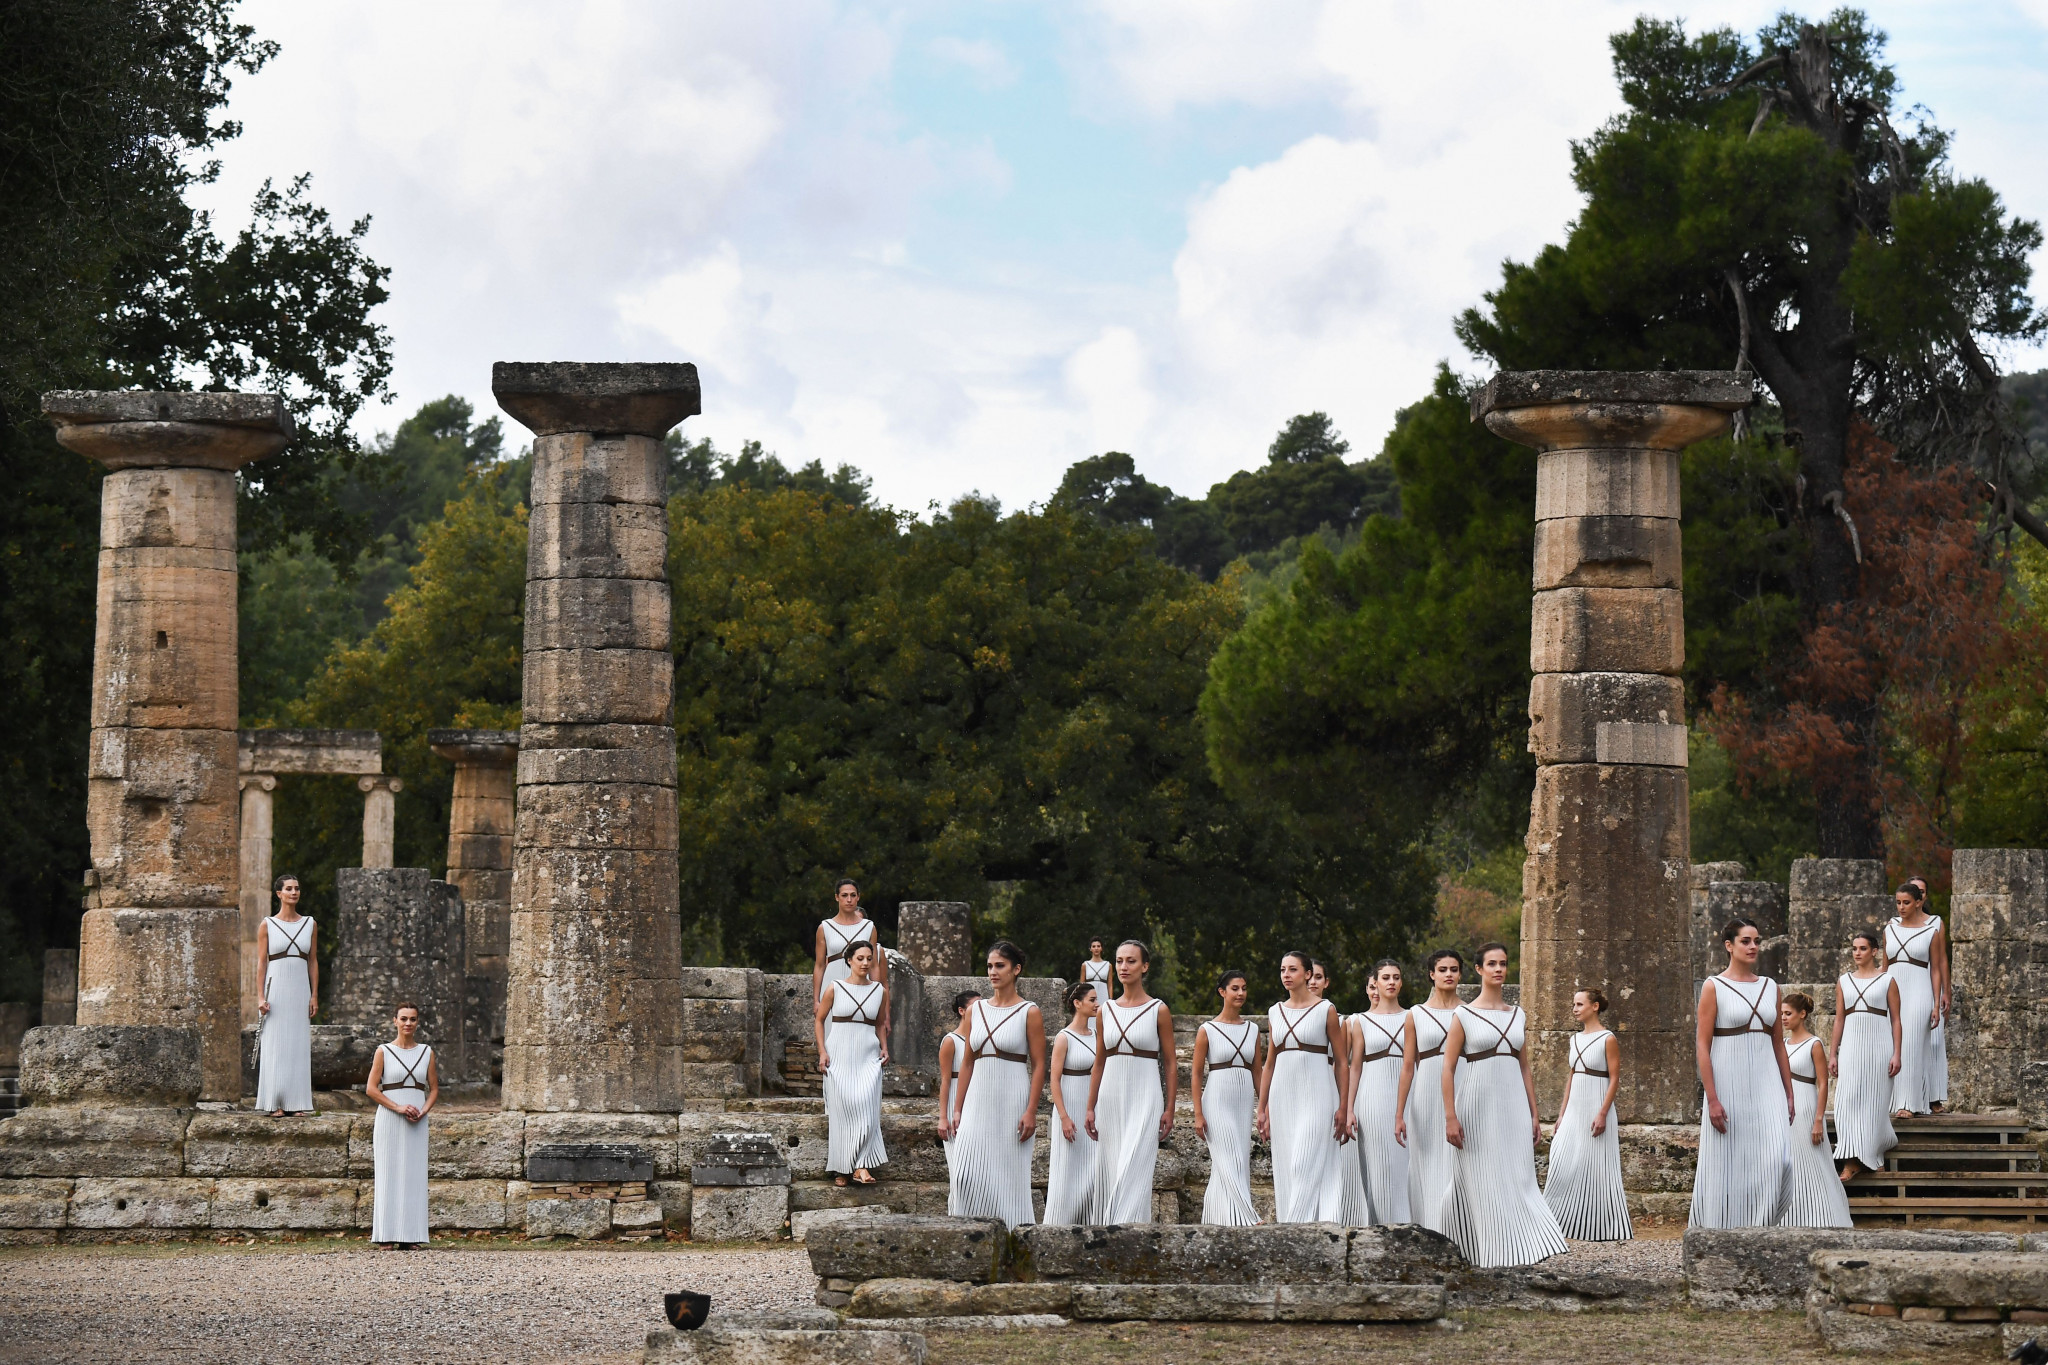 The Temple of Hera took centre stage for the event ©Getty Images